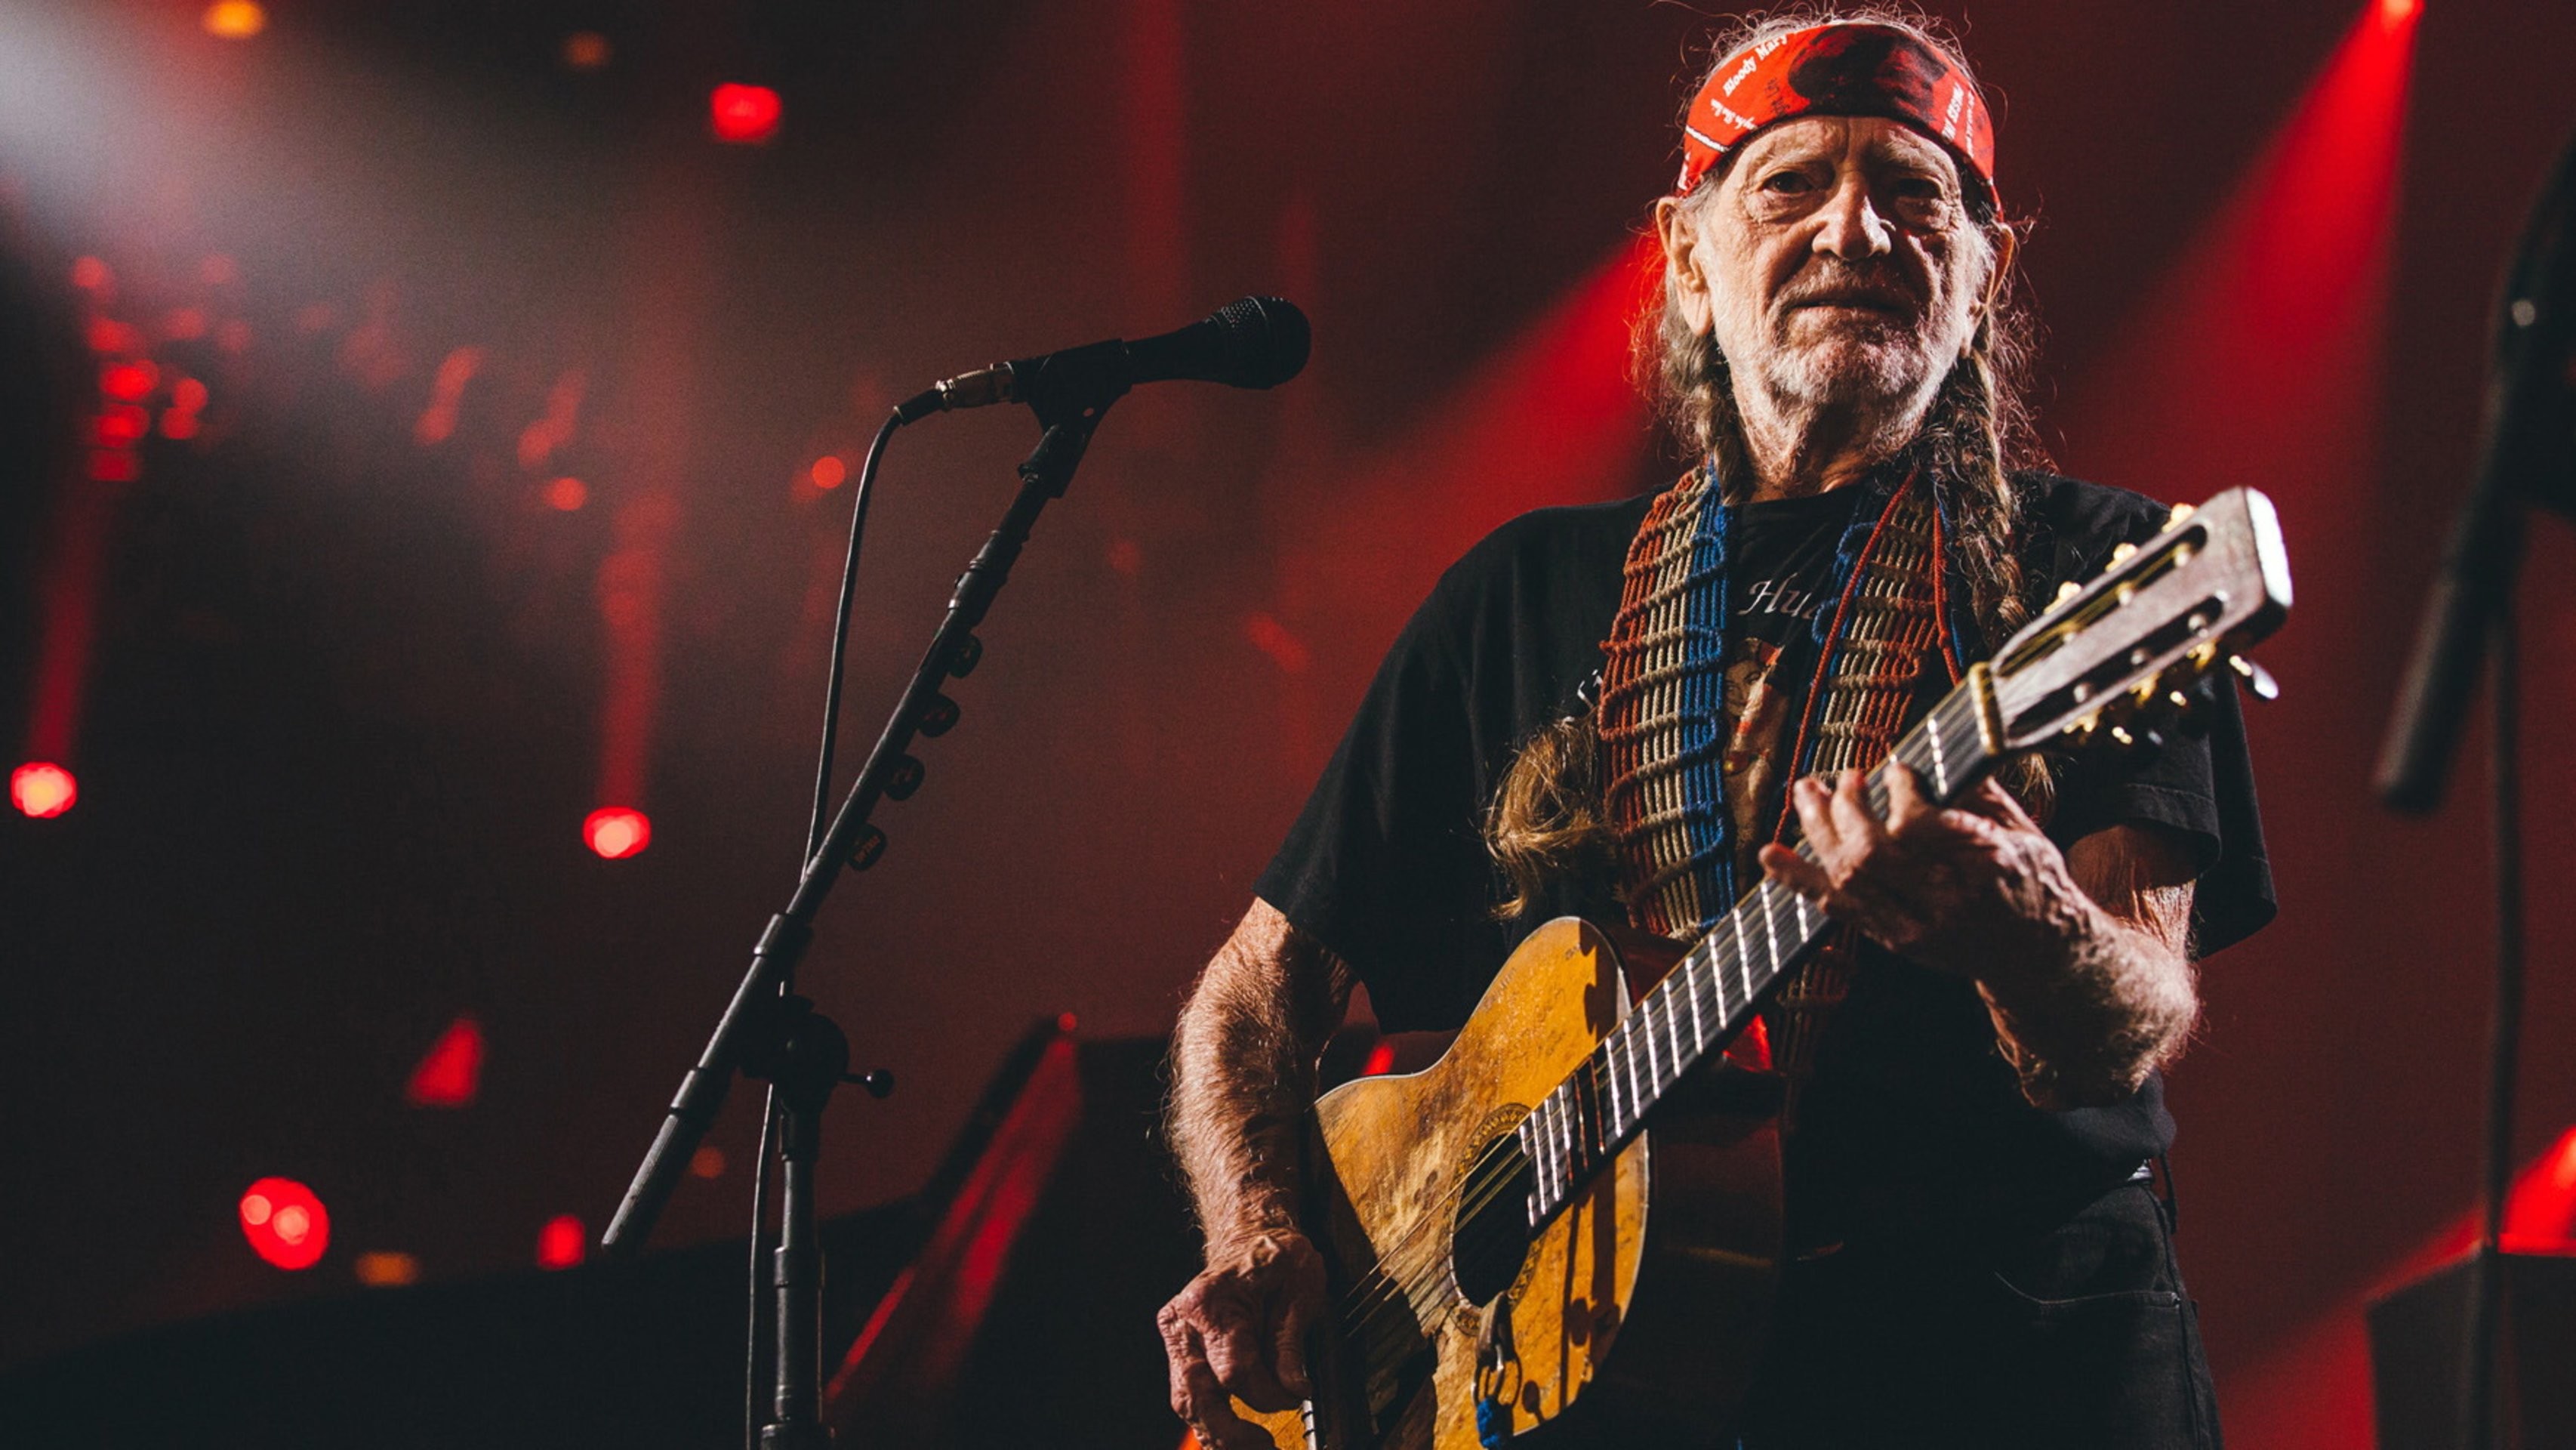 Willie Nelson Wallpapers